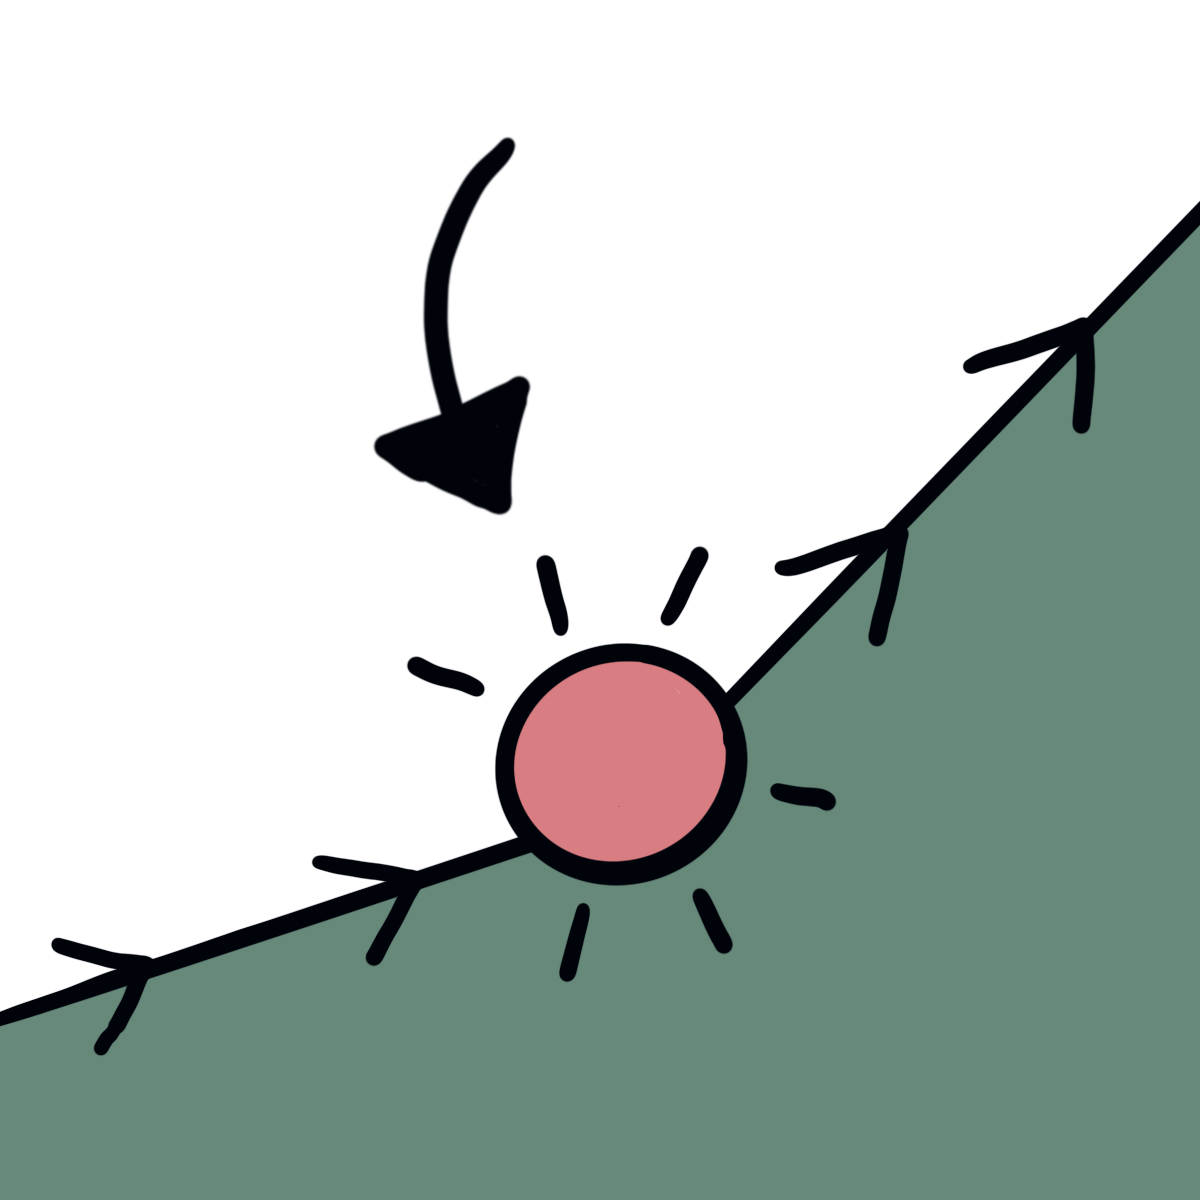 An arrow points to a red circle sitting at the point on a sloping line with directional arrows pointing up the slope at the place where it gets much steeper. The space under the line is filled in green.